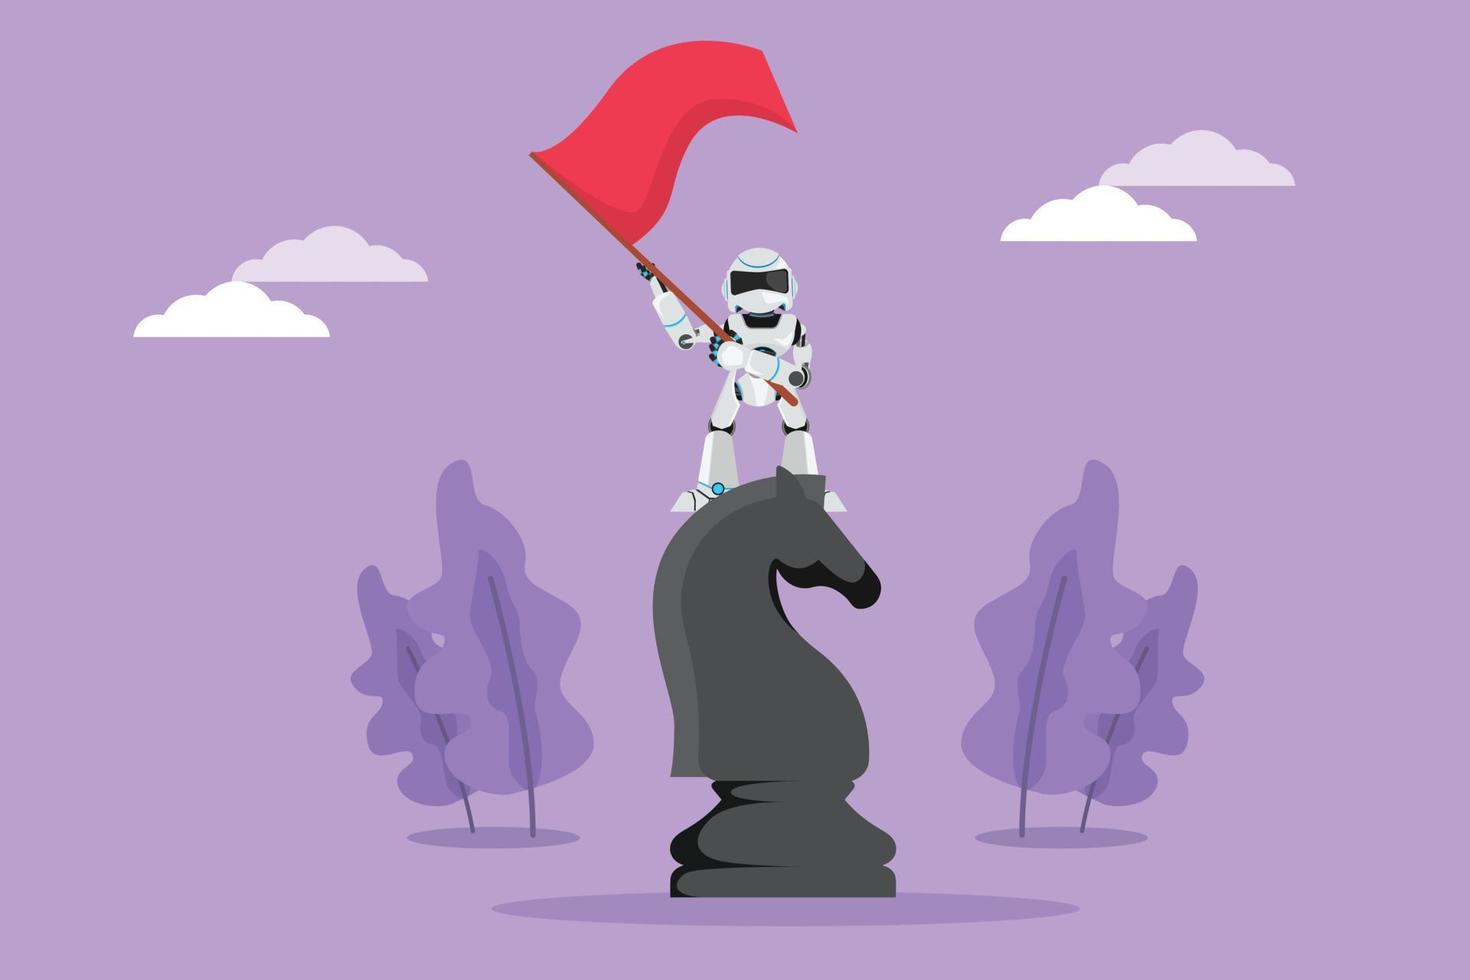 Graphic flat design drawing robot standing on top of big horse knight chess and waving flag. Winning competition. Technology development. Machine learning processes. Cartoon style vector illustration